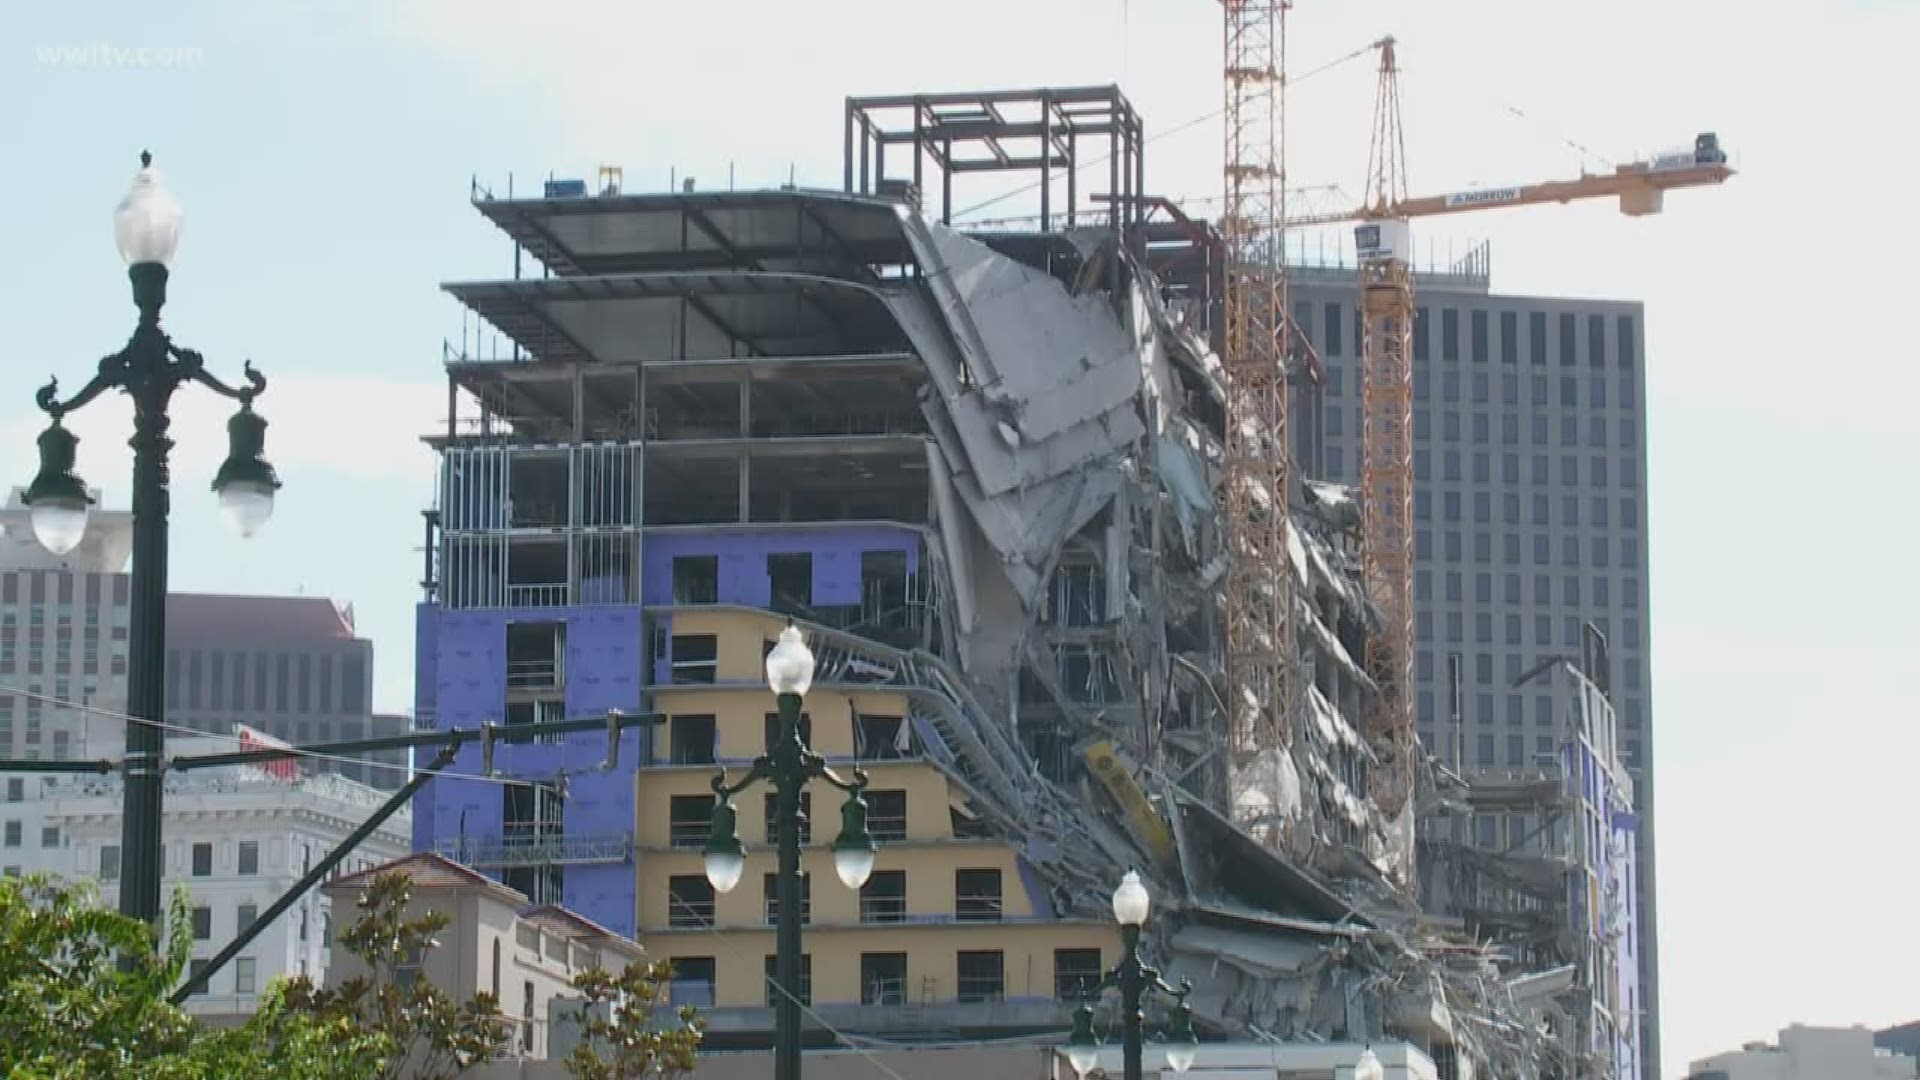 The Hard Rock partially collapsed Oct. 12, killing three workers. The cause of the collapse remains under investigation.